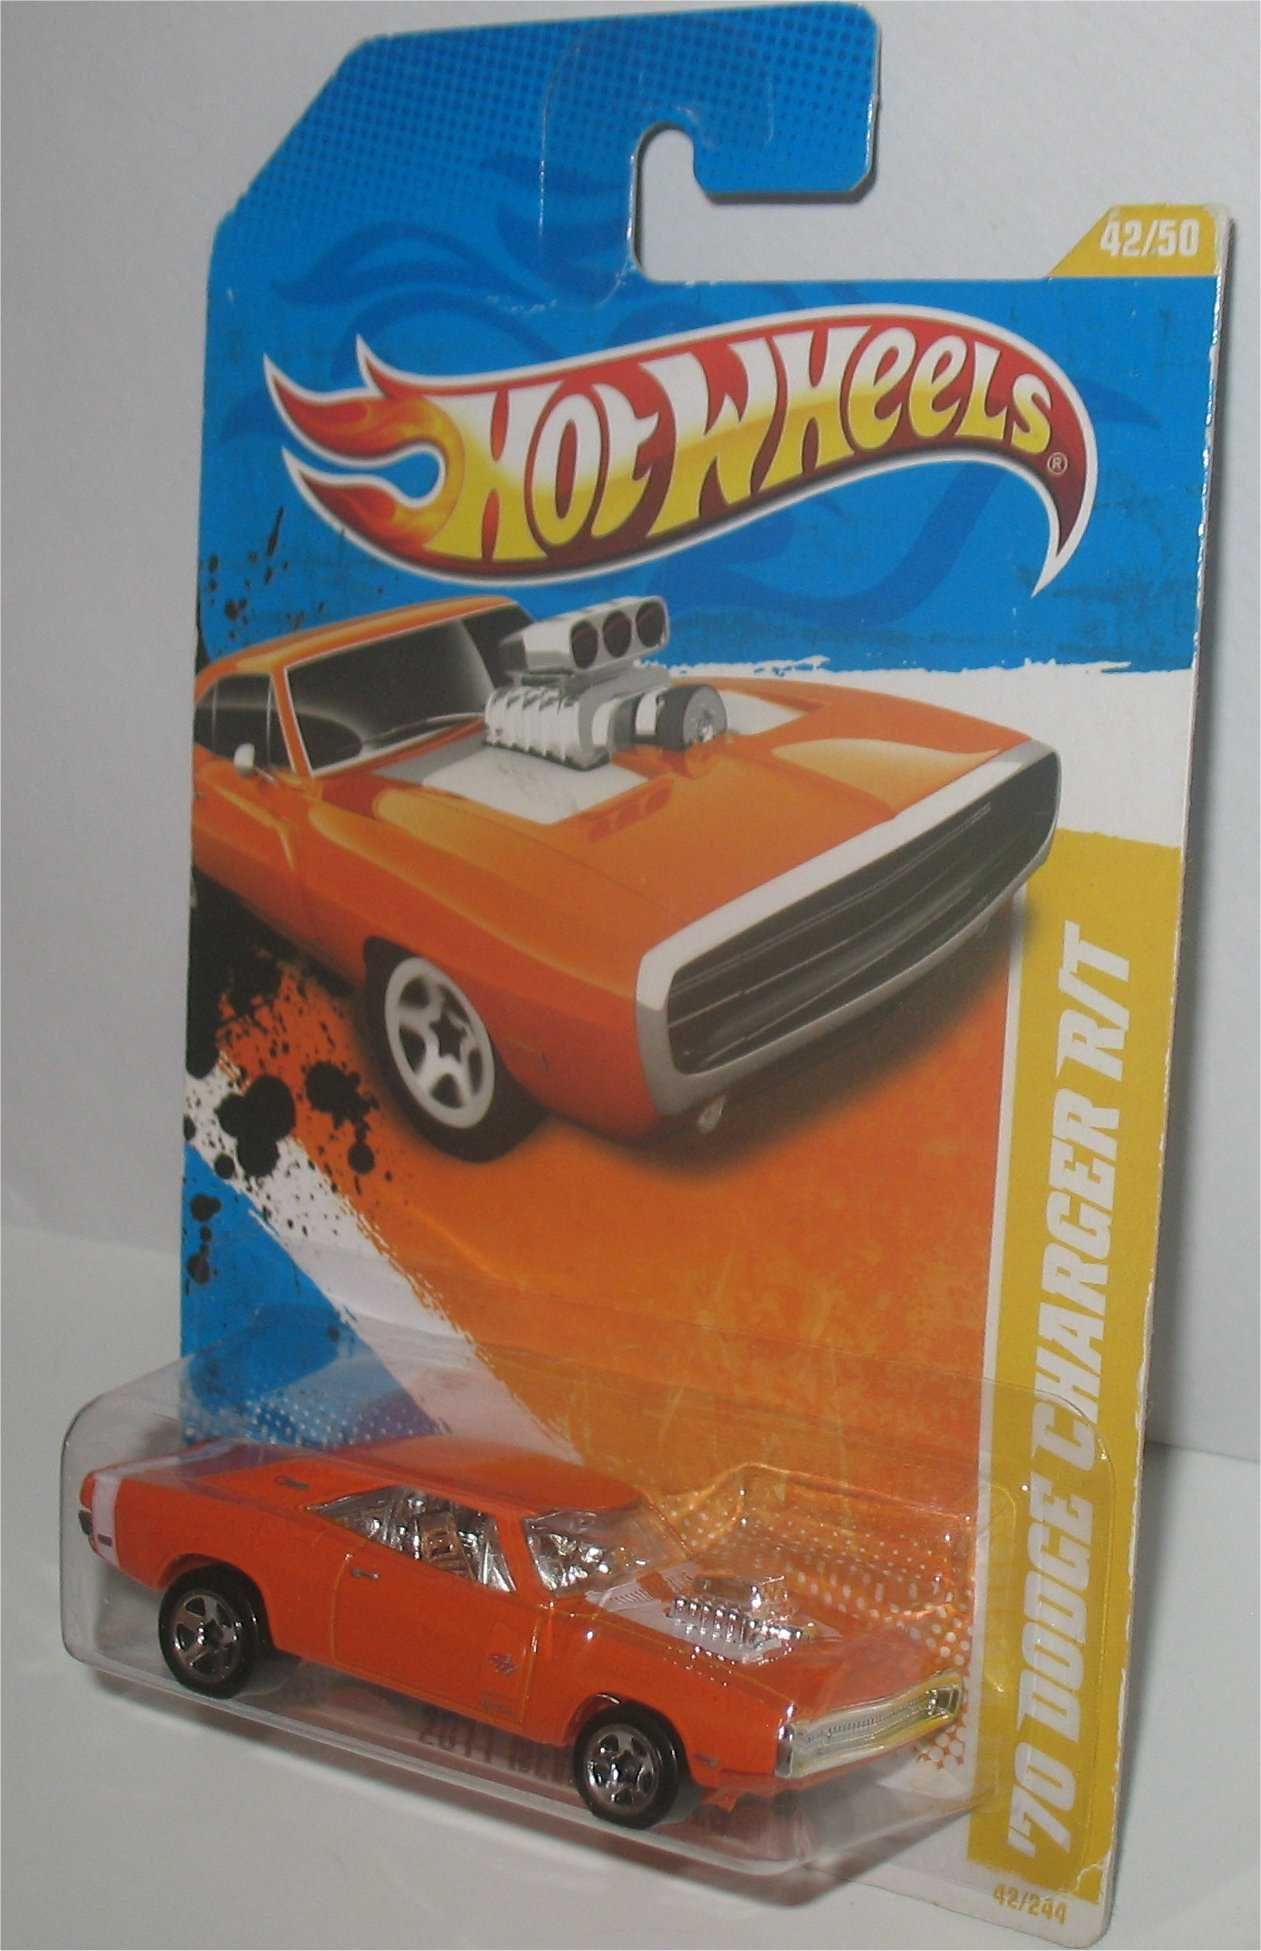 Hot Wheels - 70 Dodge Charger R/T (2011)